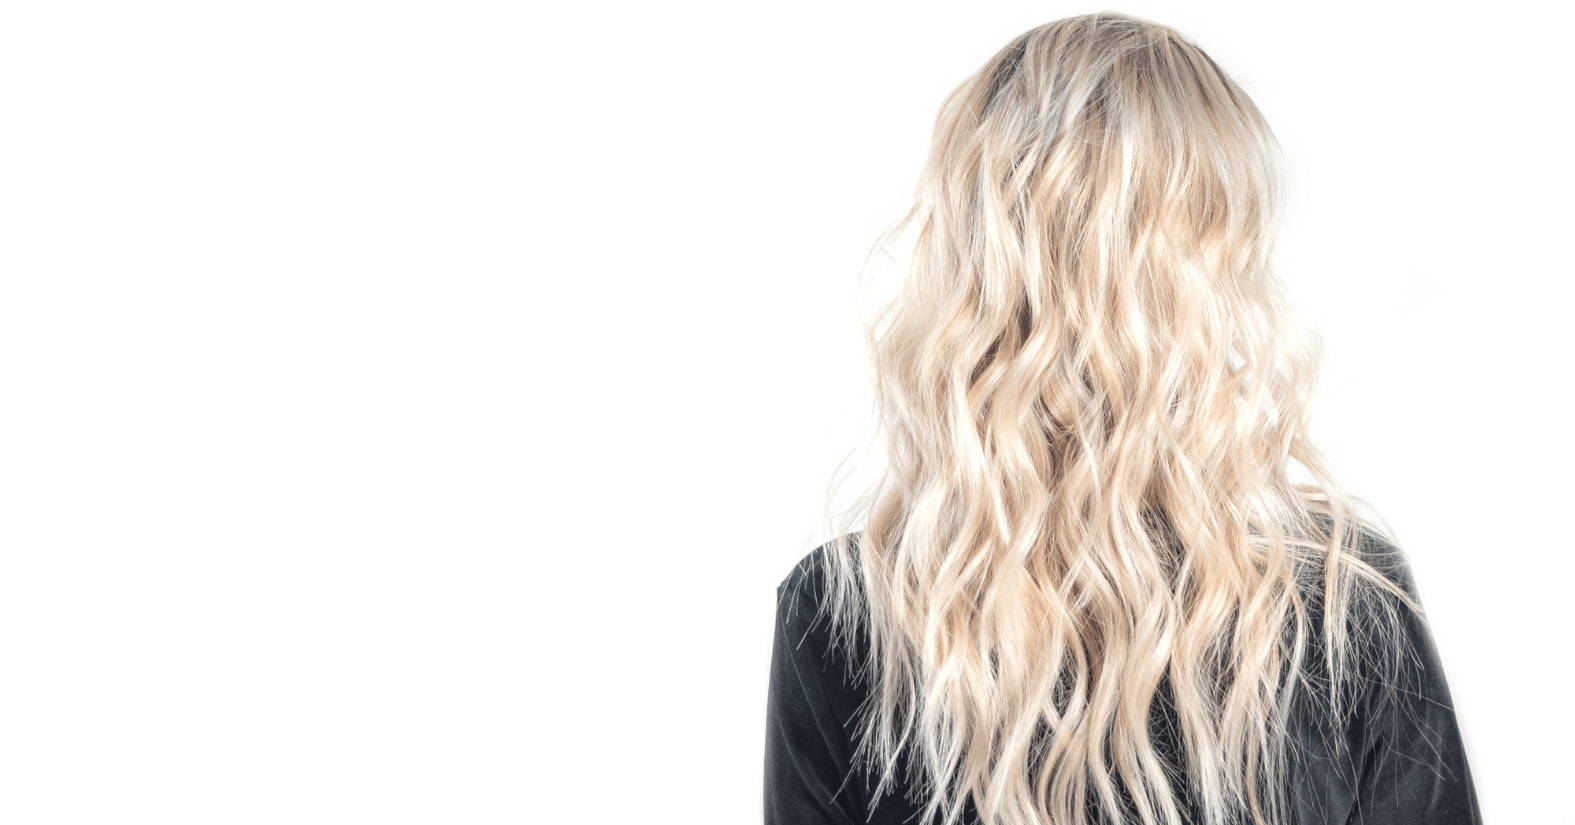 BLONDE HAIR CARE: HOW TO PREP FOR SUMMER BLONDE HIGHLIGHTS